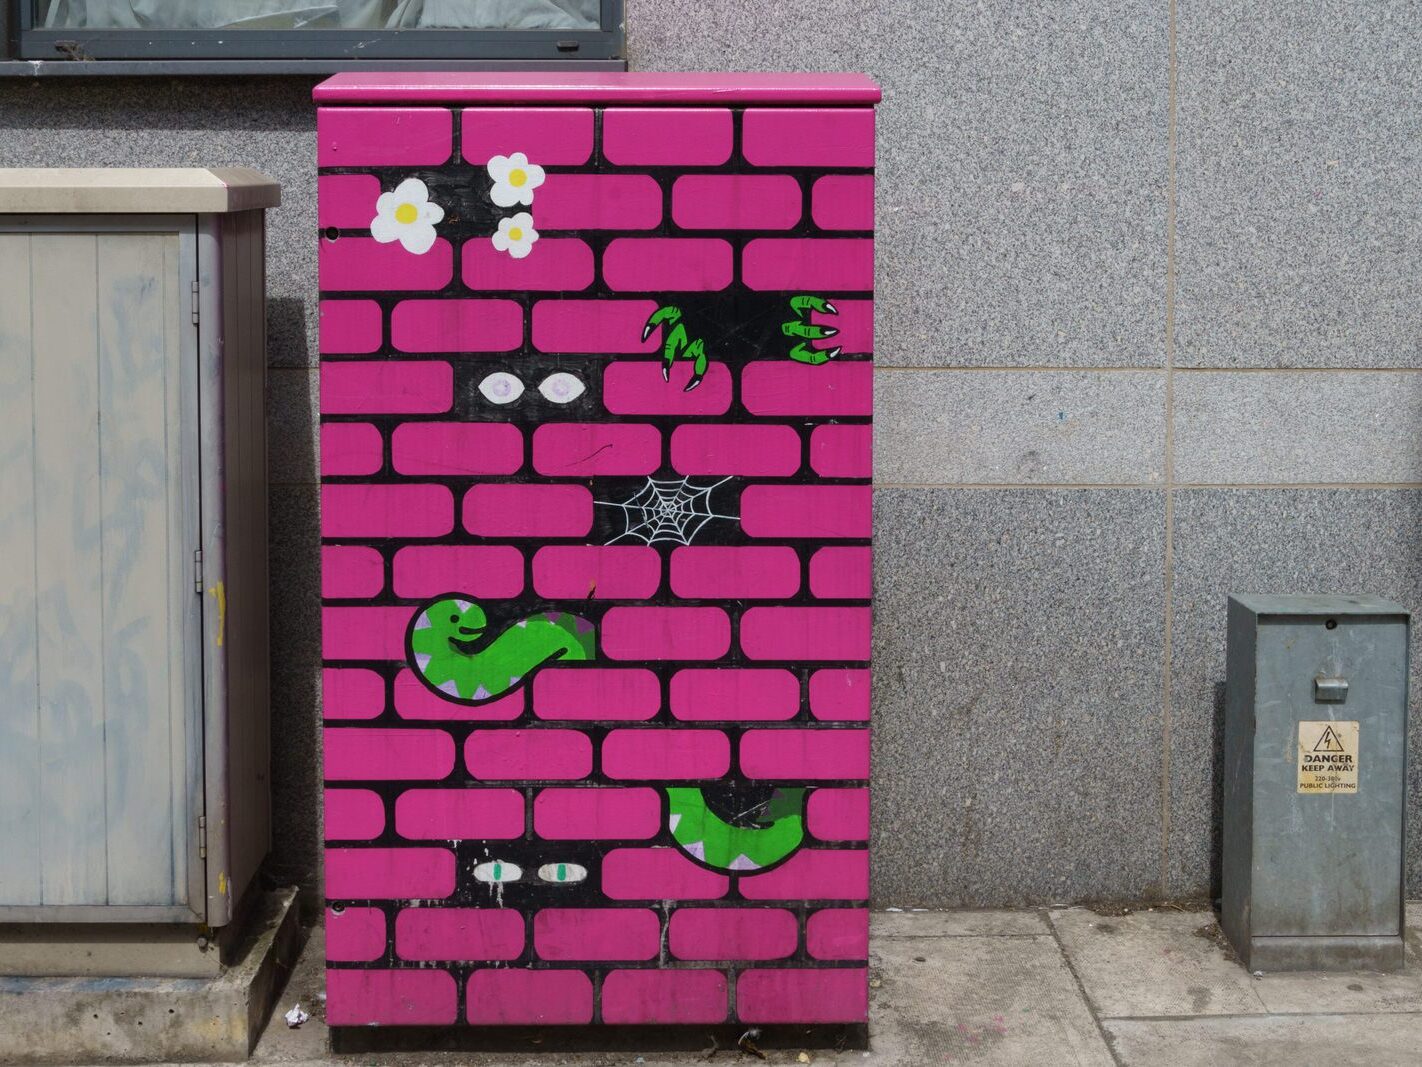 MORE PAINT-A-BOX STREET ART BY BY MARTA OKUKICZ [A TALE IN THE WALL]-236745-1